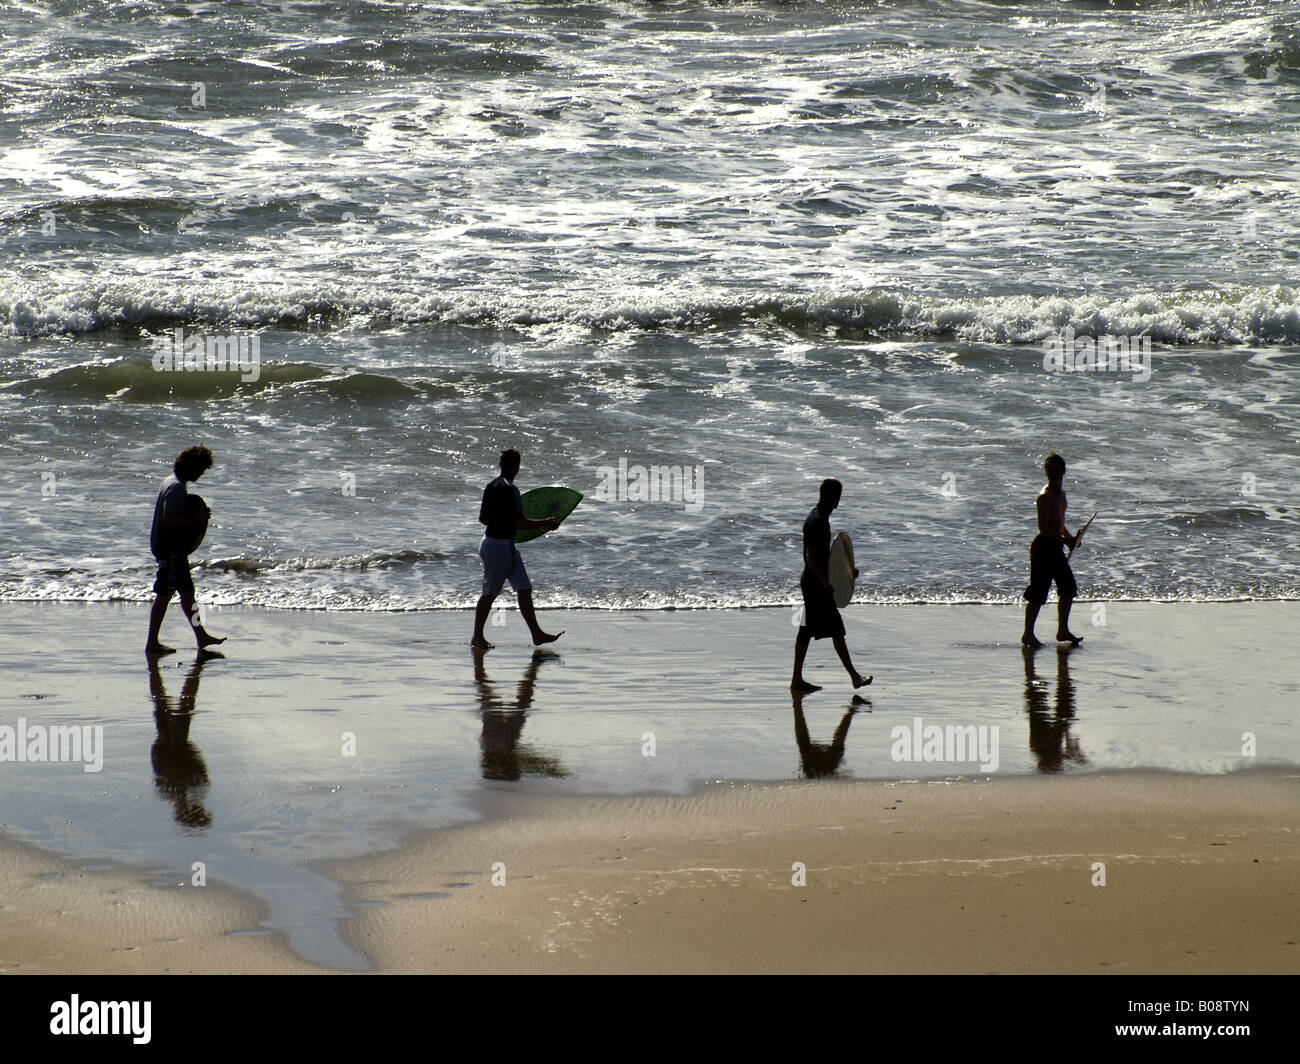 Silhouette of four young men with skimboards walking along the waters edge at sunset. Stock Photo